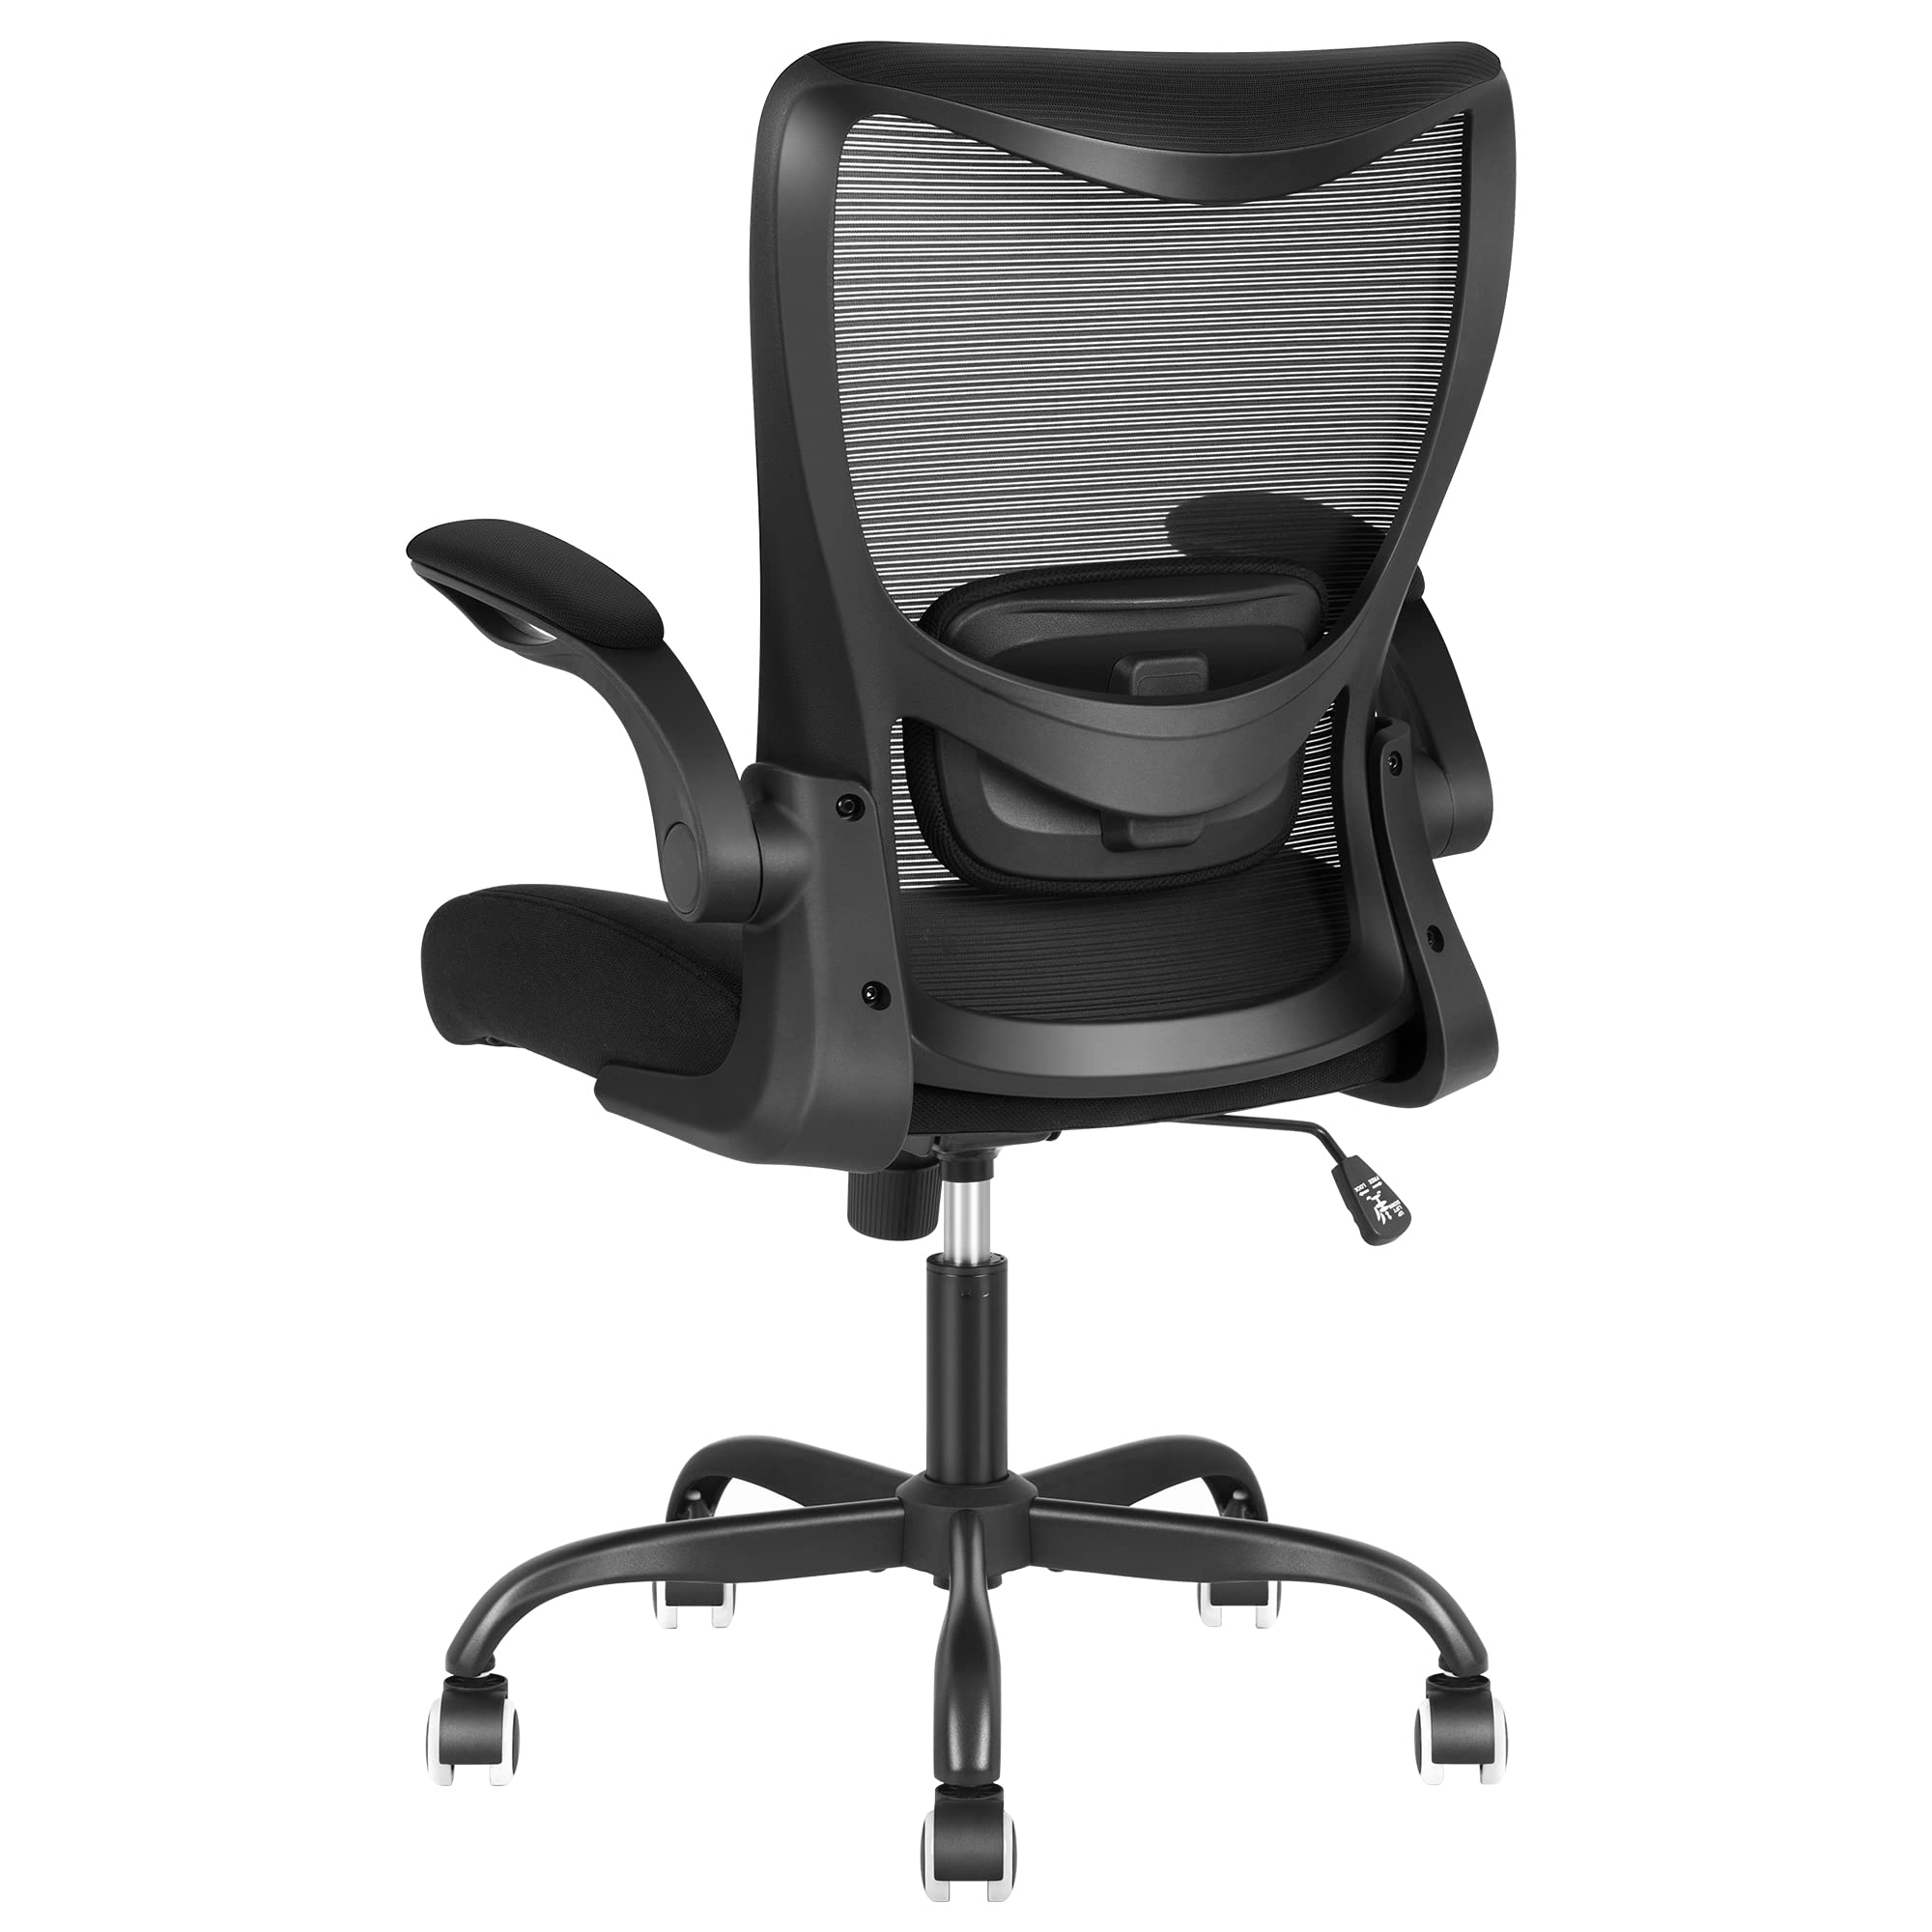 MUXXSTIL Office chair, Mid Back Desk chair with Breathable Mesh, Ergonomic  Task chair with Adjustable Lumbar Support, Swivel computer cha